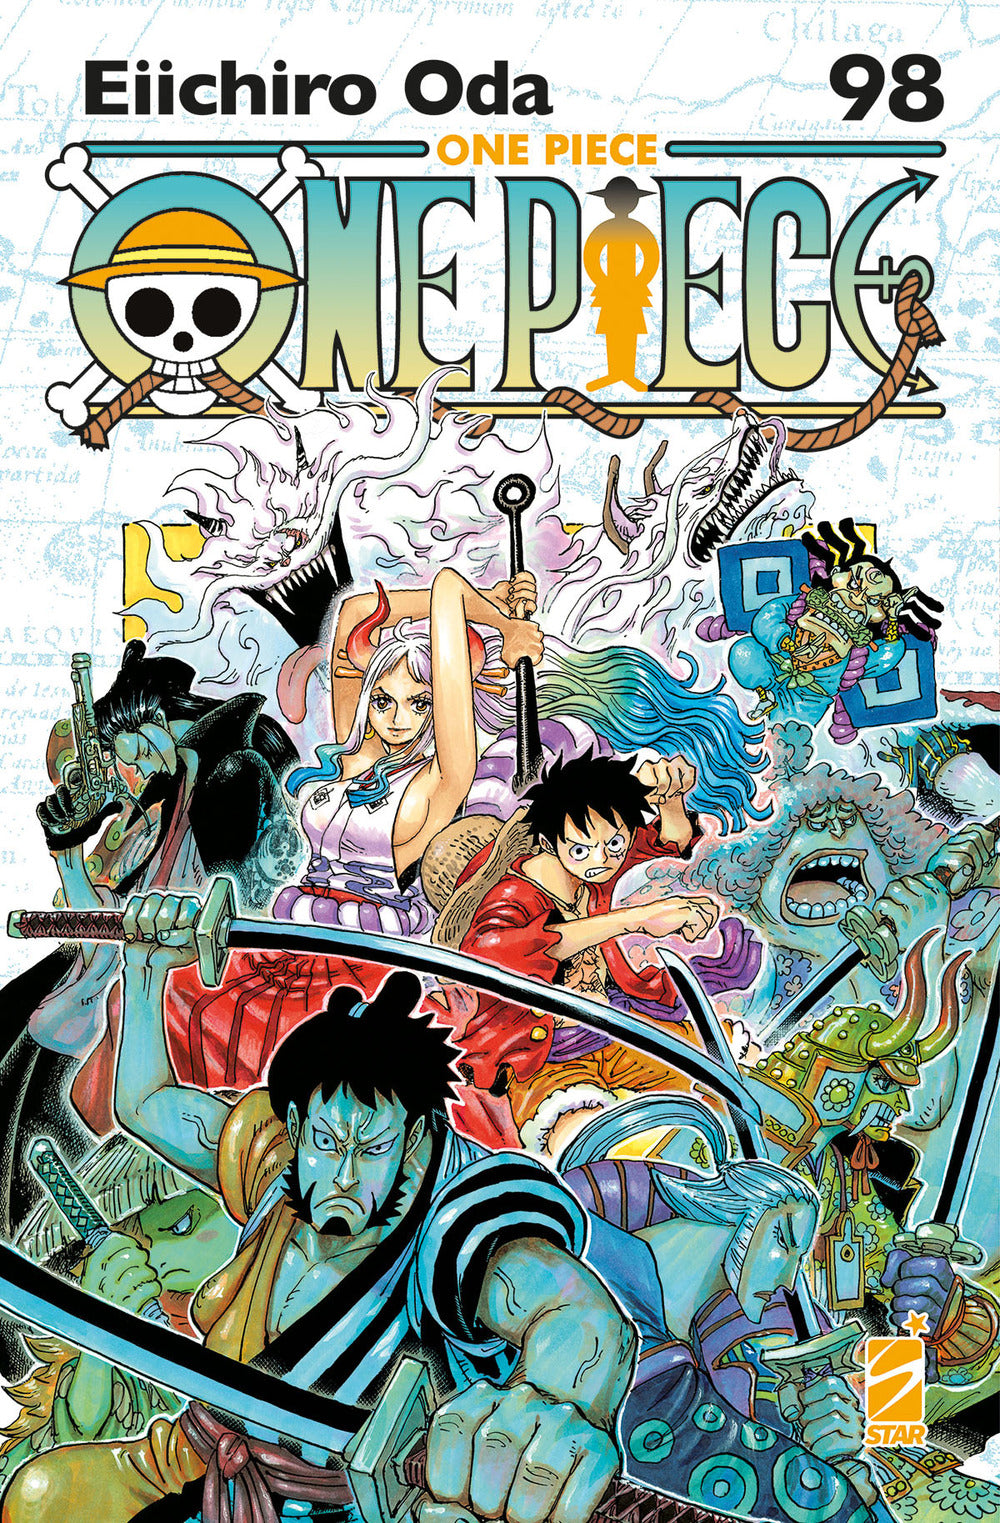 One piece. New edition. Vol. 98